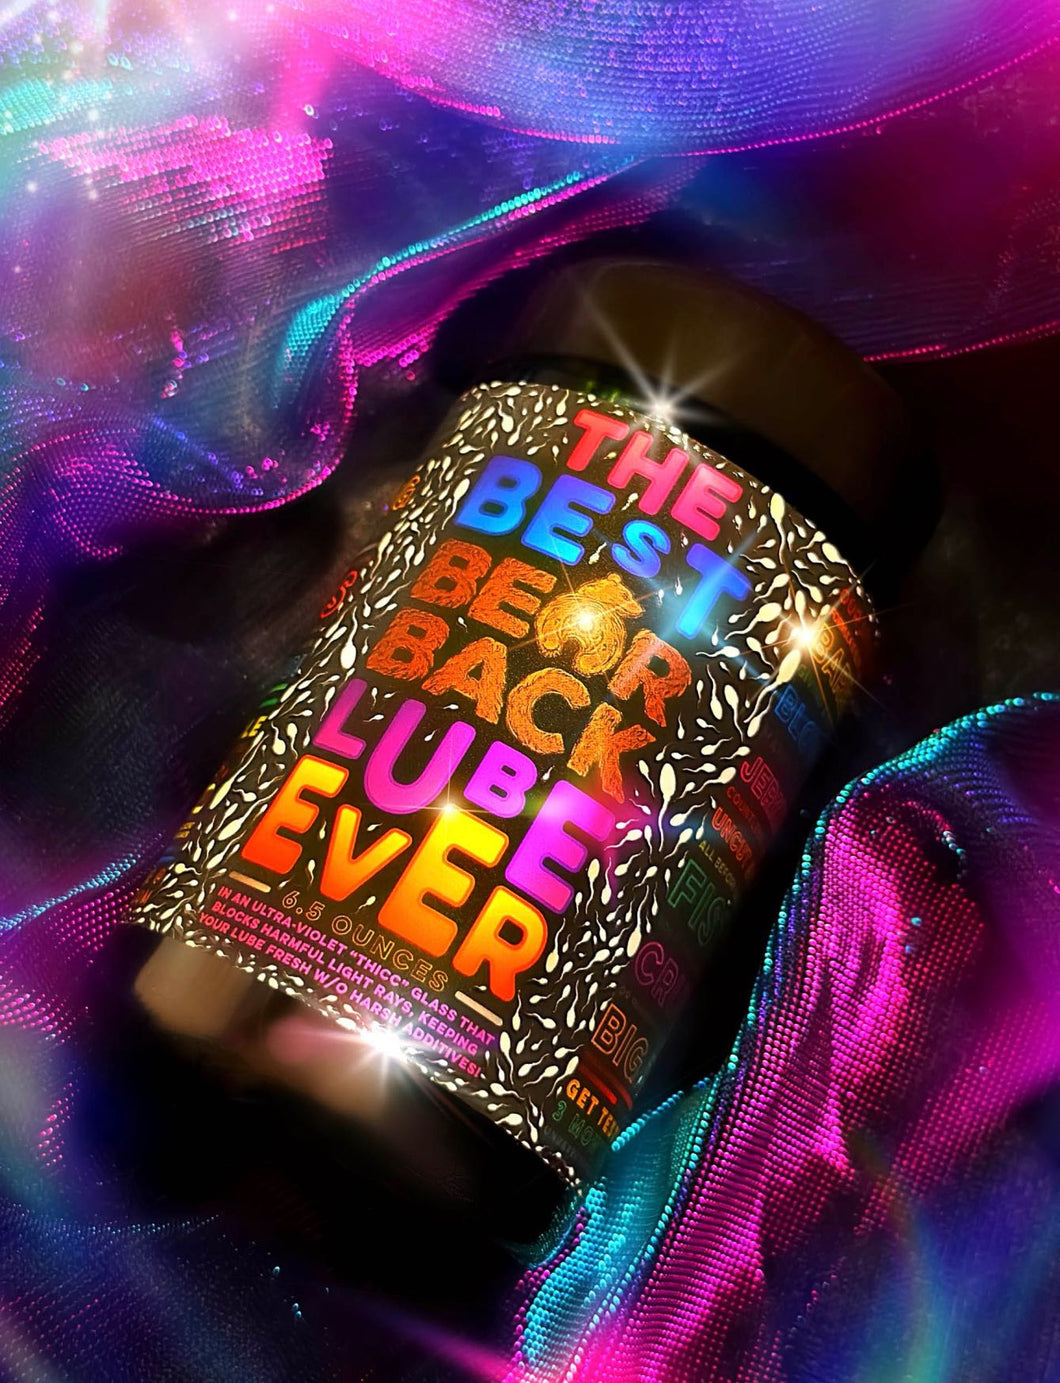 The Best Bearback Lube Ever (6.5oz)